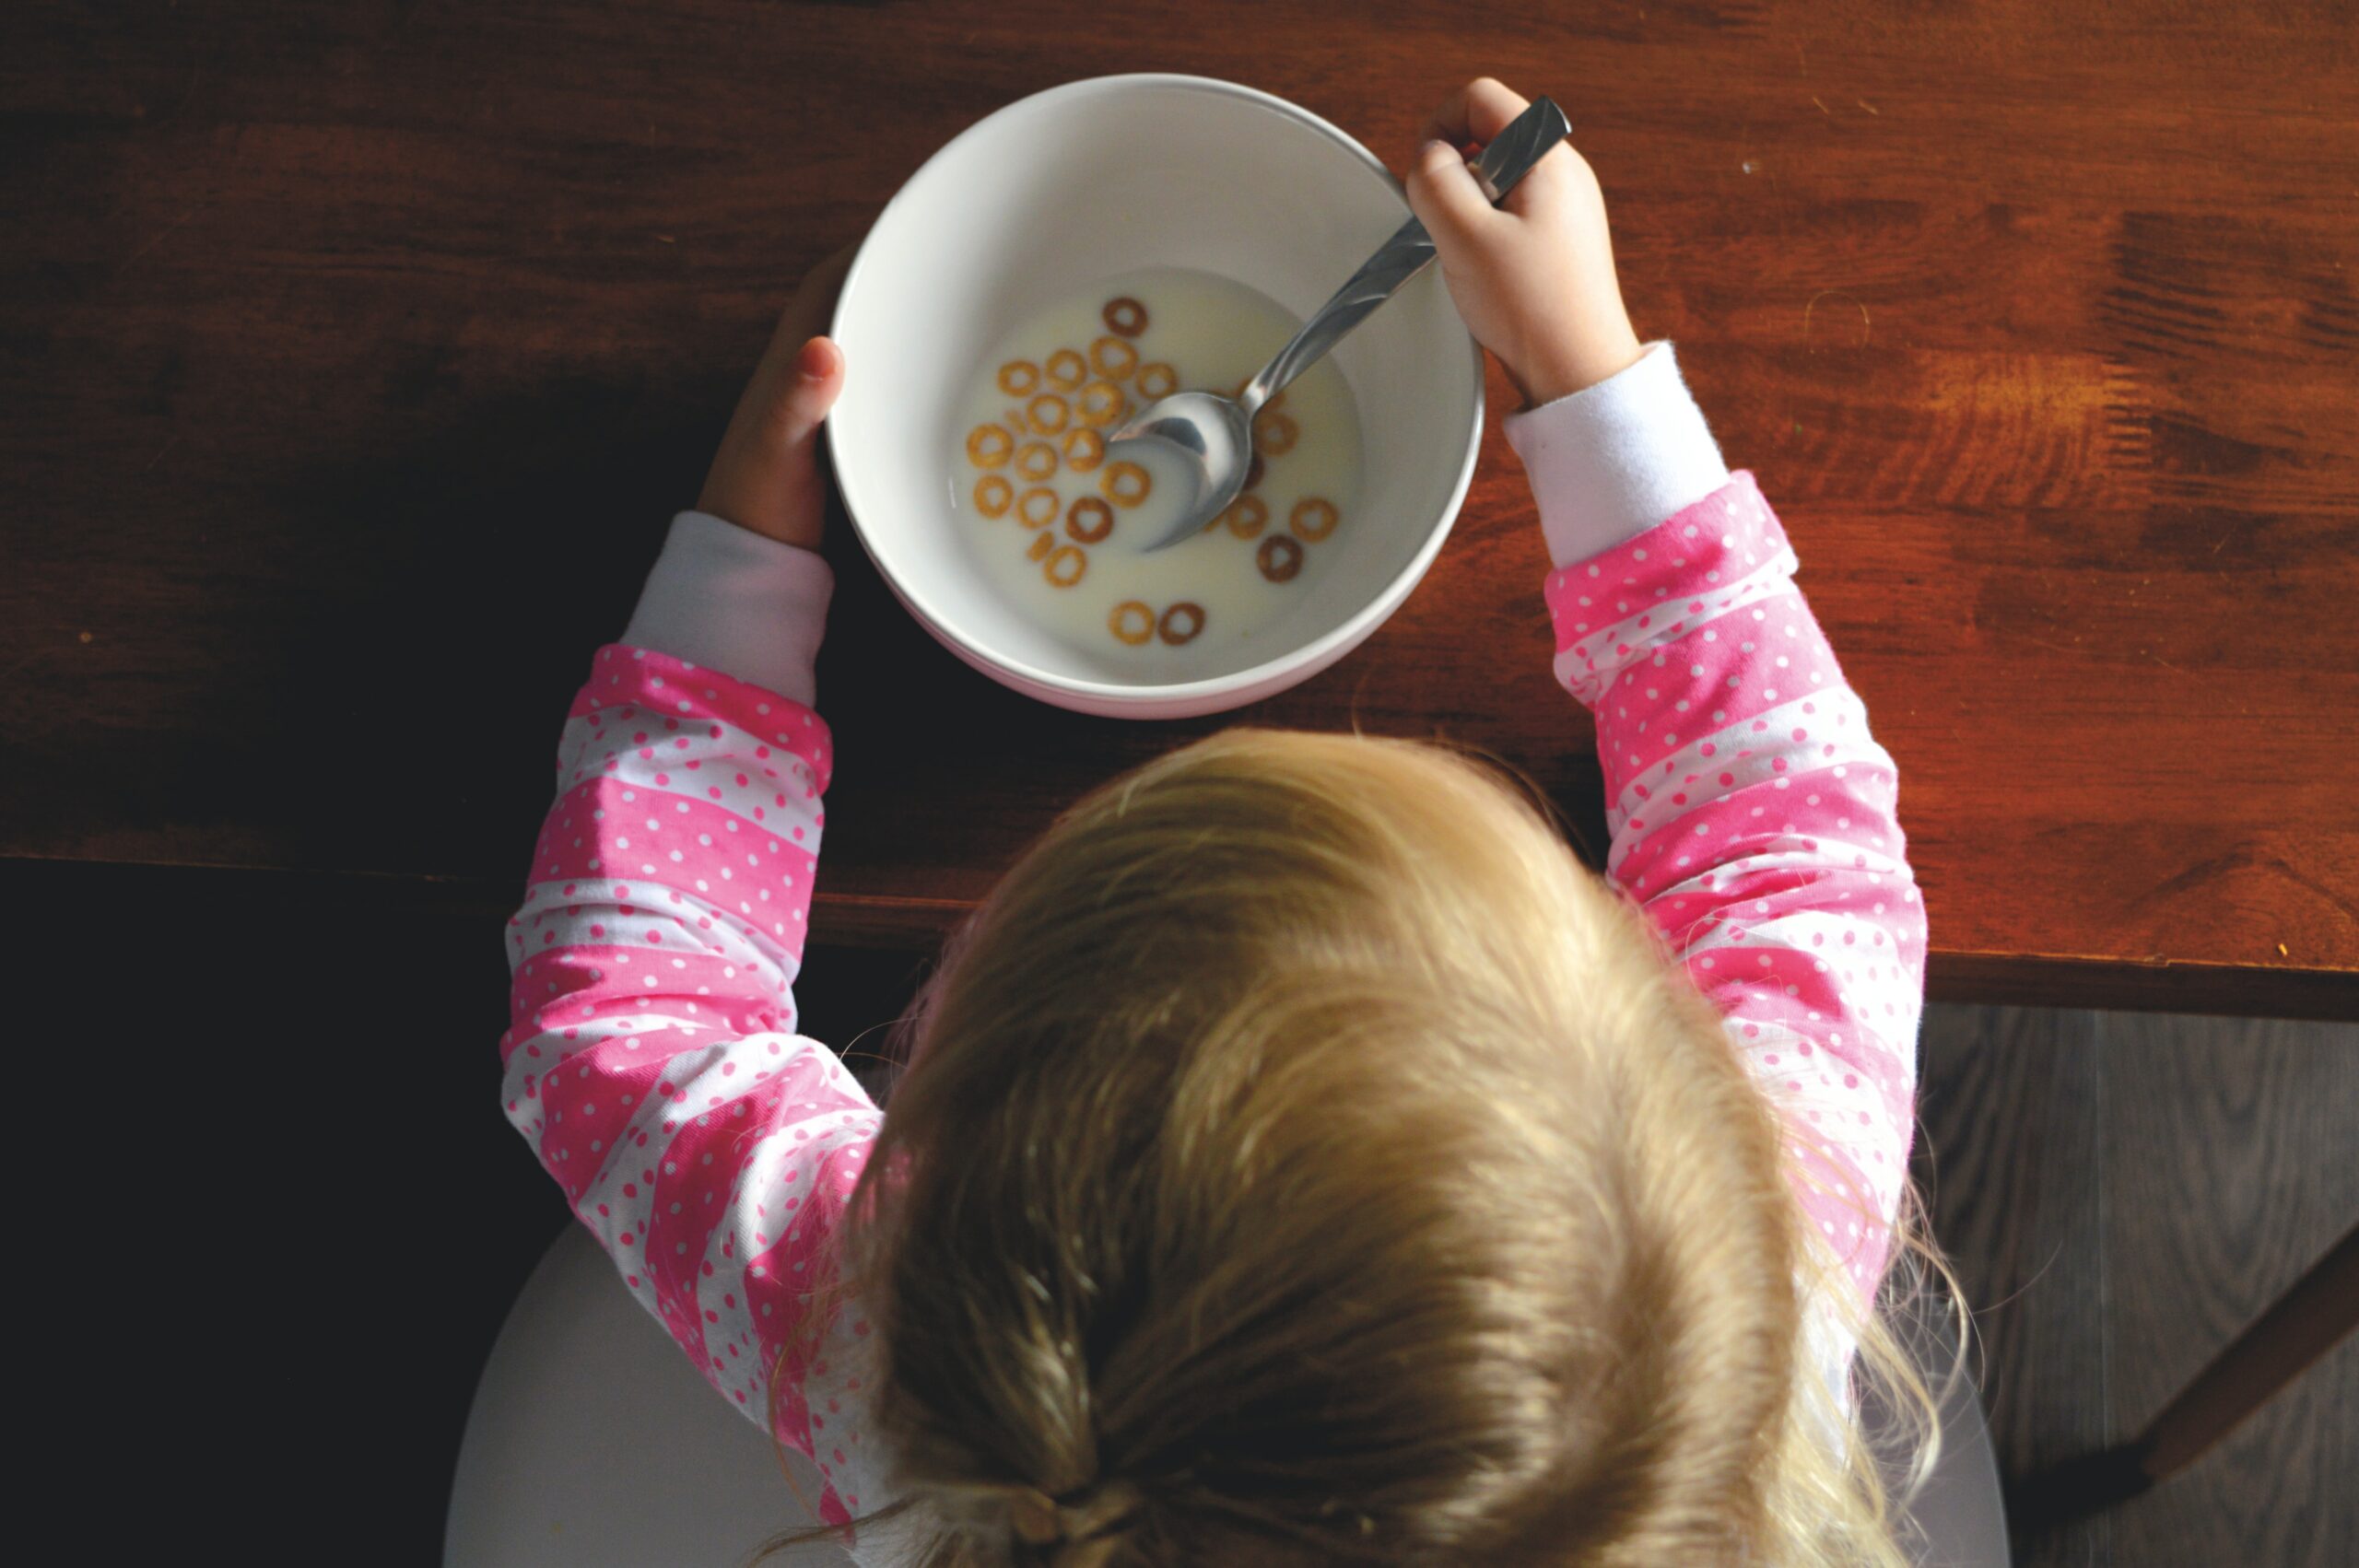 Child finishing bowl of cereal overhead view